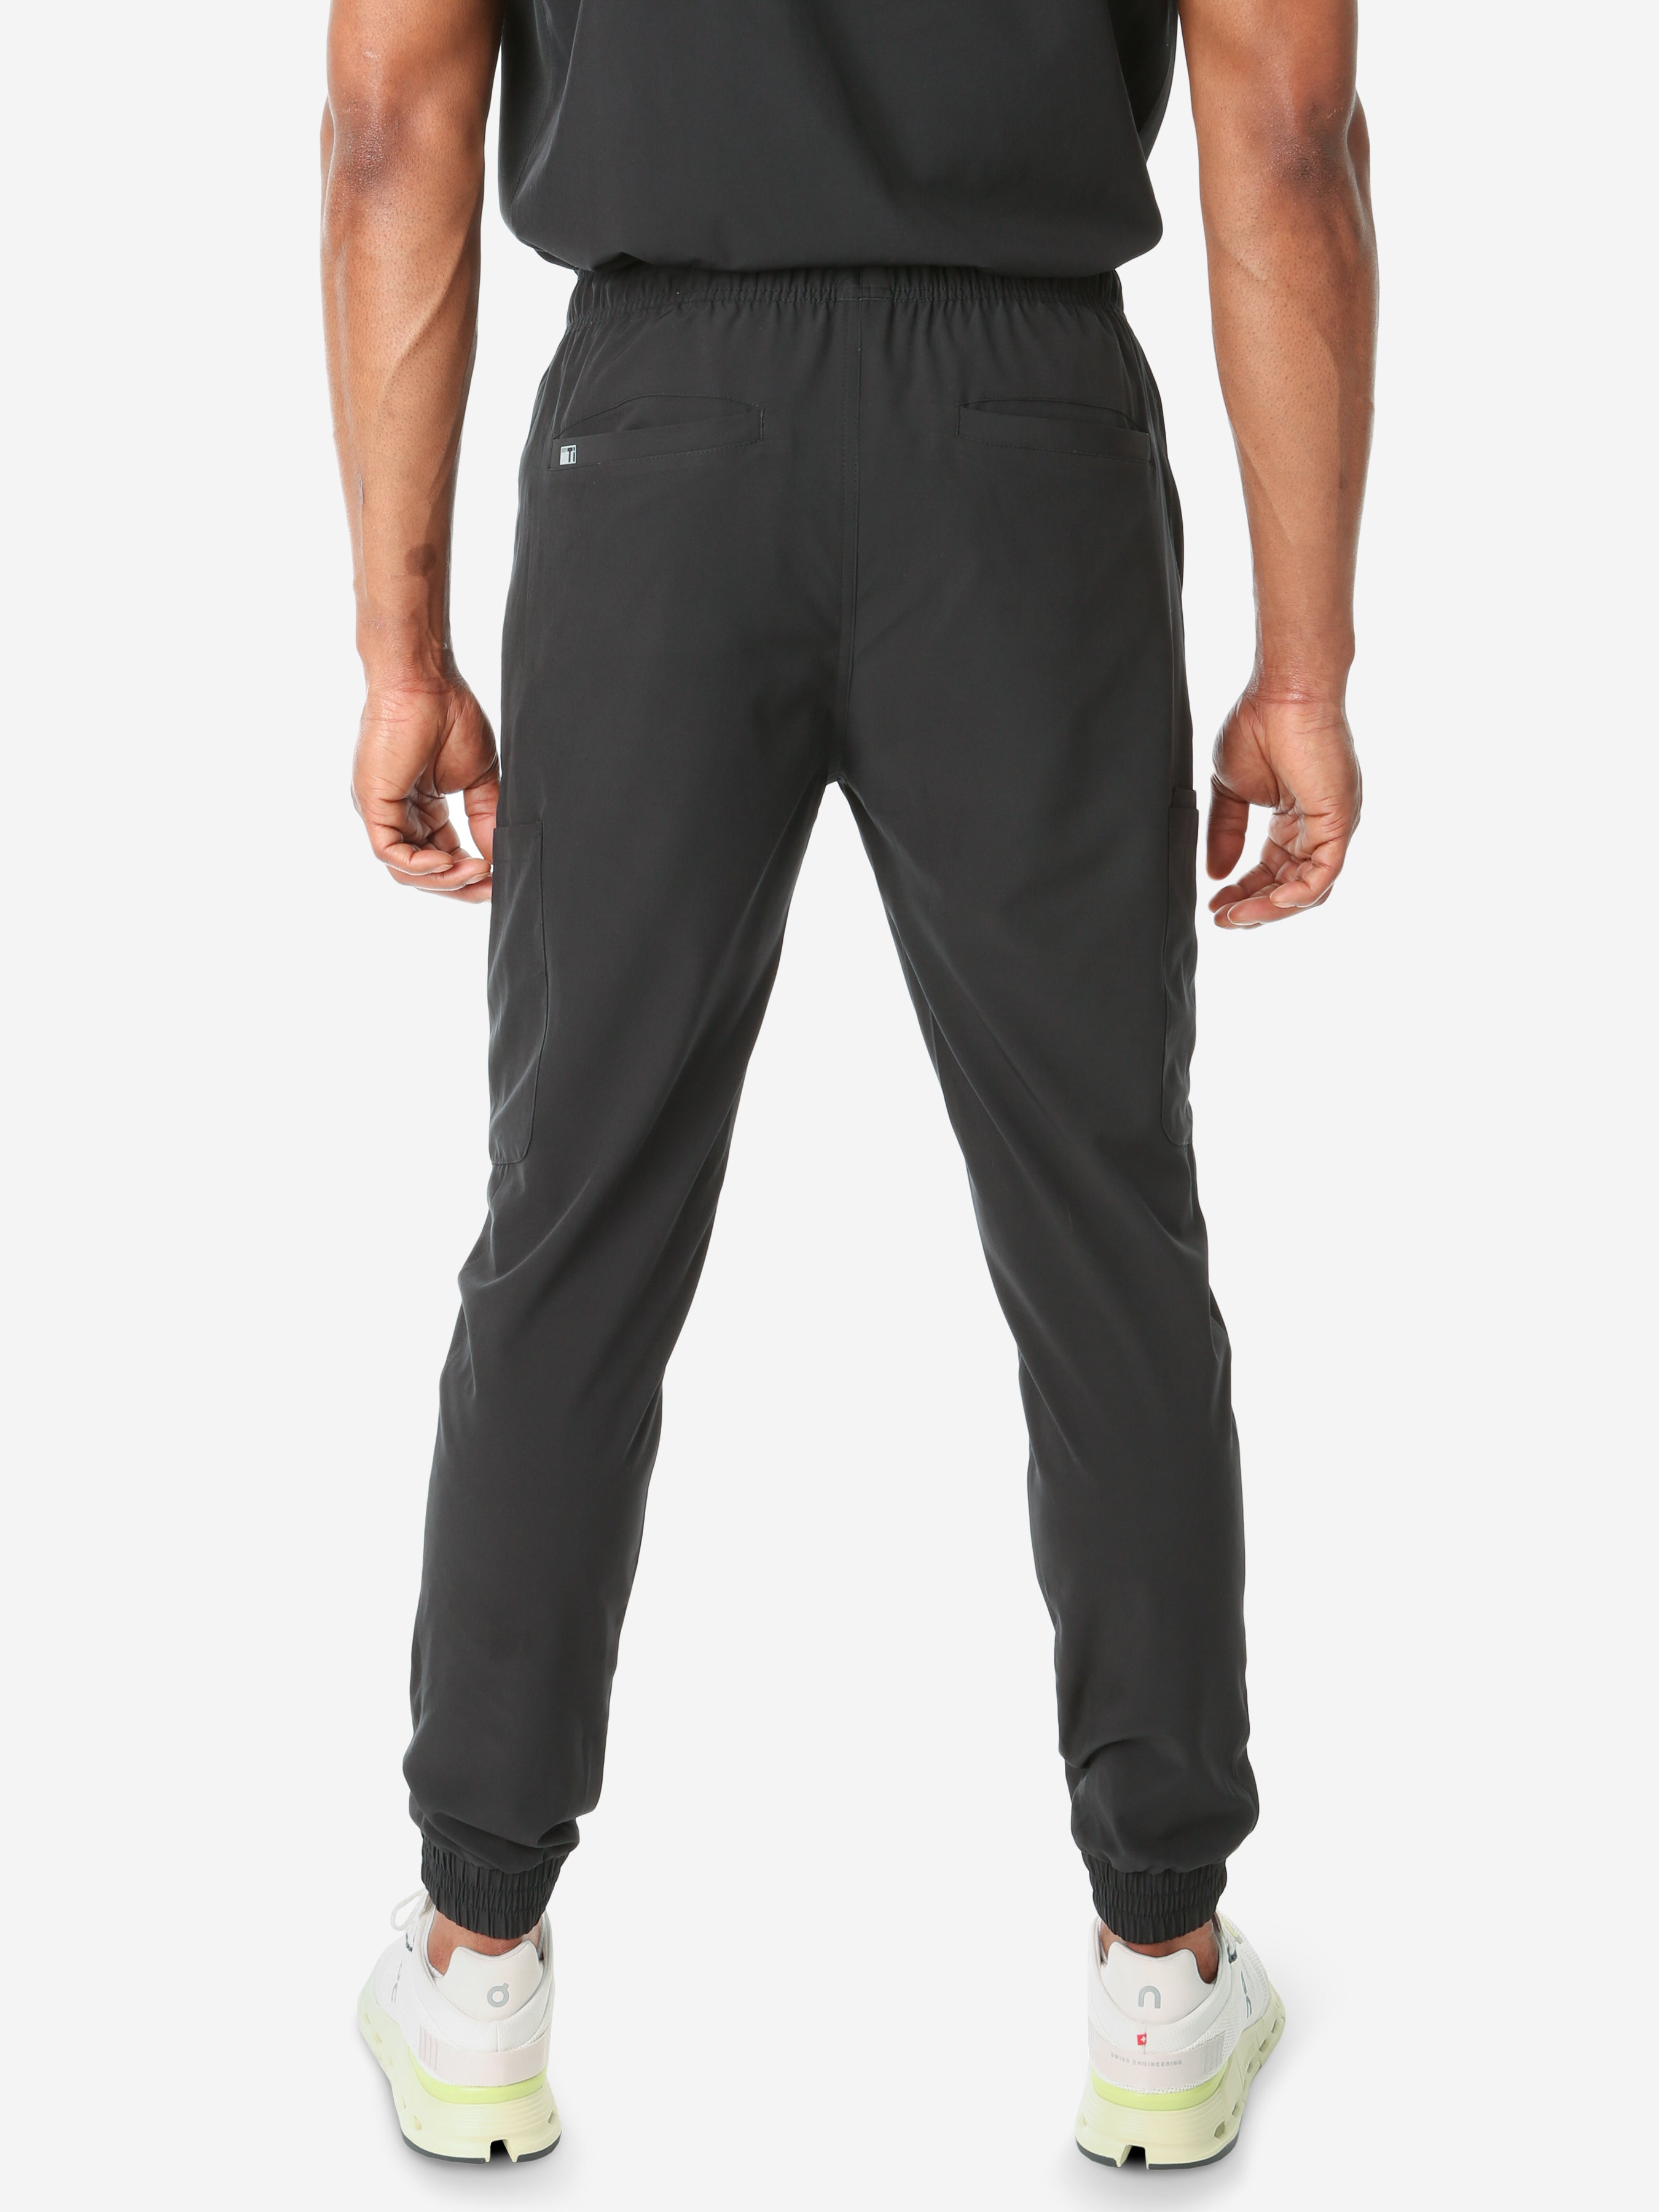  MediChic Mens Scrubs Stretch Scrub Joggers Pants with Six  Pockets, Available in Over Eight Colors Black: Clothing, Shoes & Jewelry